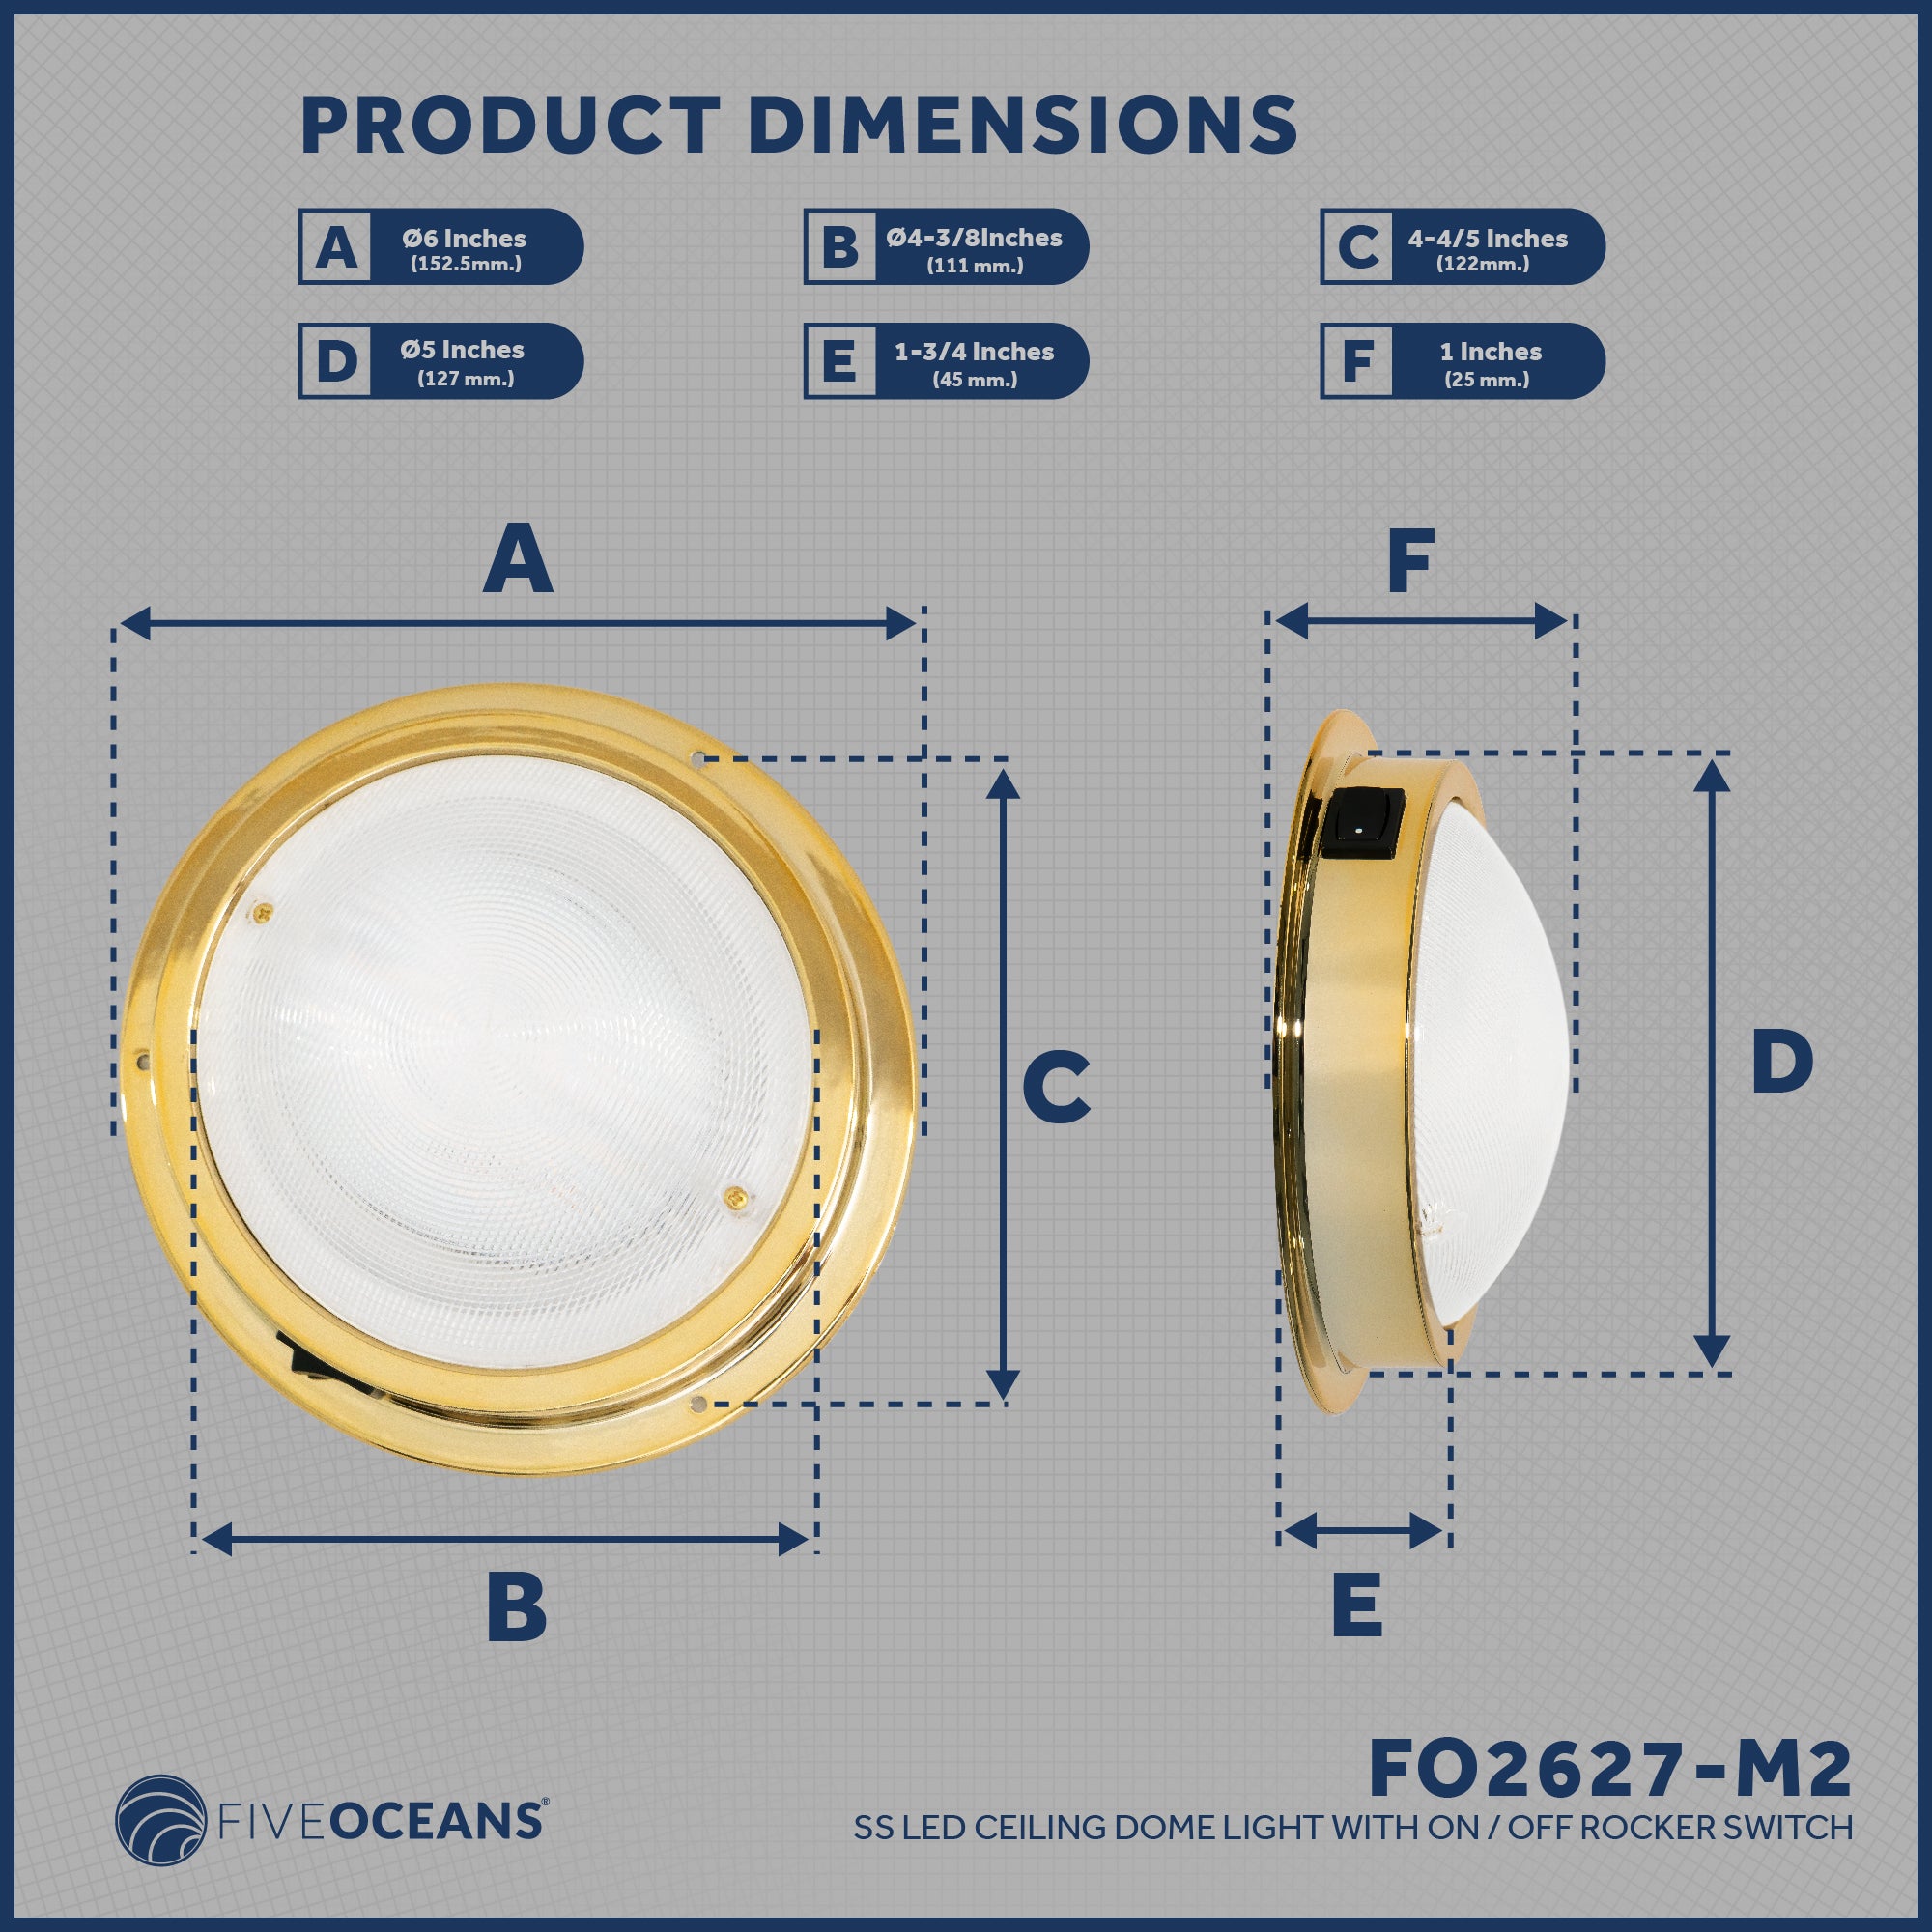 LED Interior Dome Ceiling Light, 6" Surface Mount, Daylight White, 2-Pack - FO2627-M2